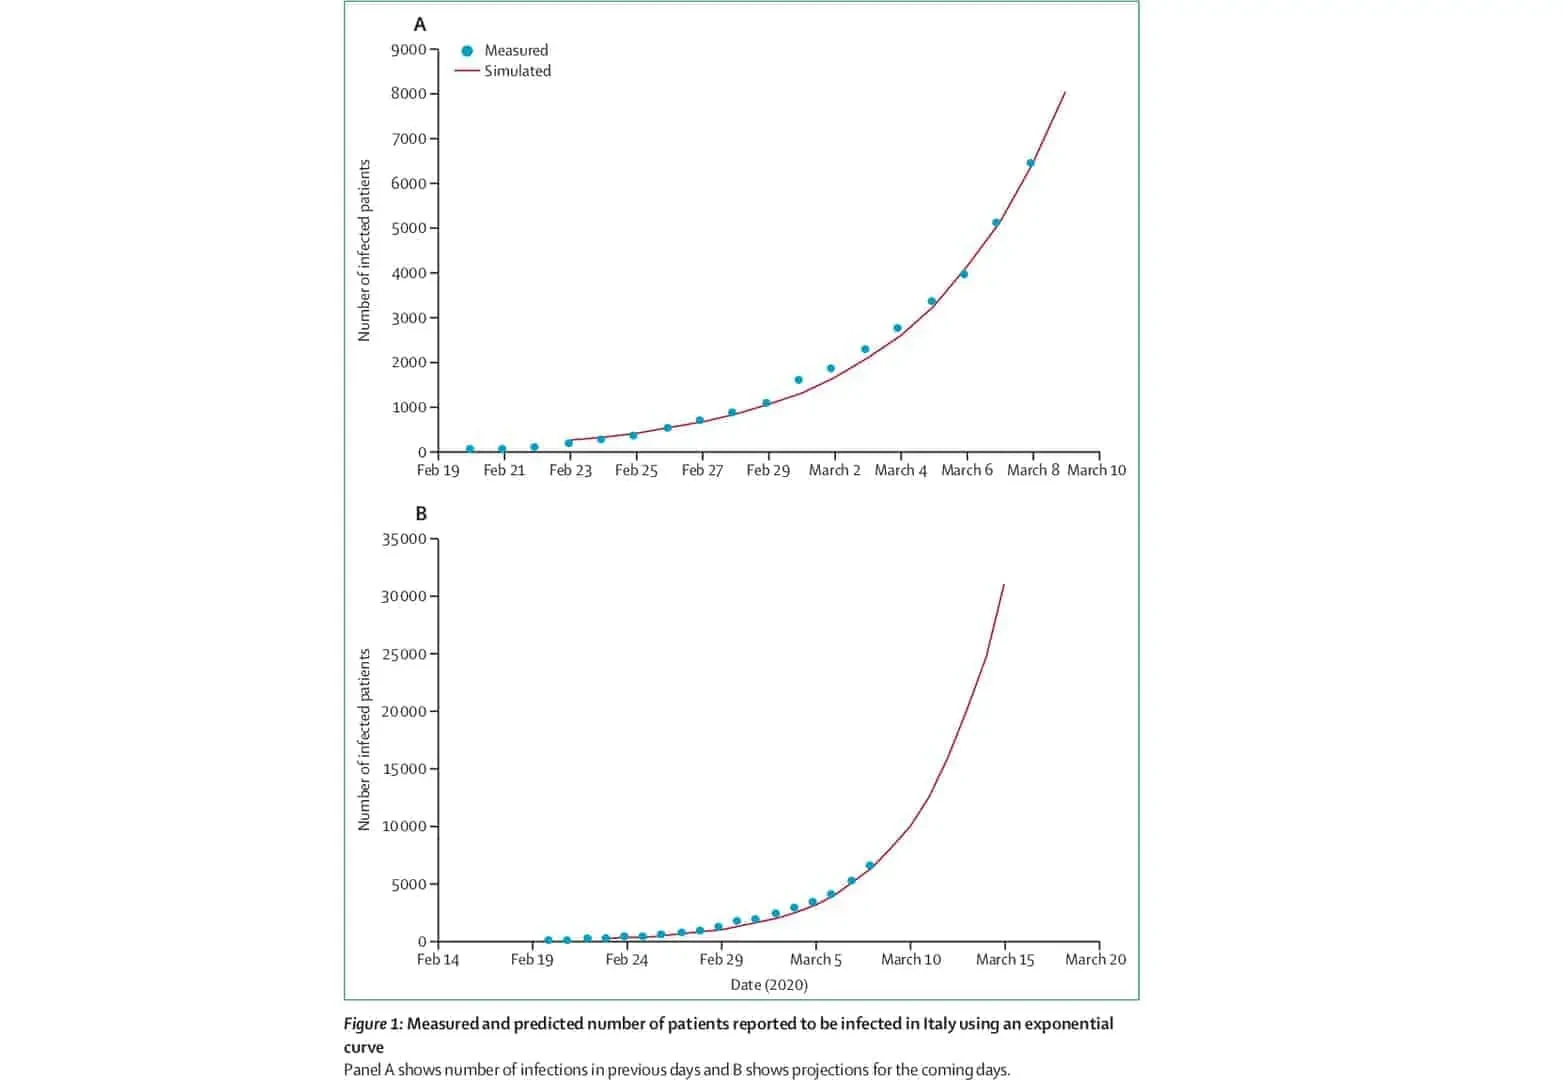 Figure 1: Measured and predicted number of patients reported to be infected in Italy using an exponential curve